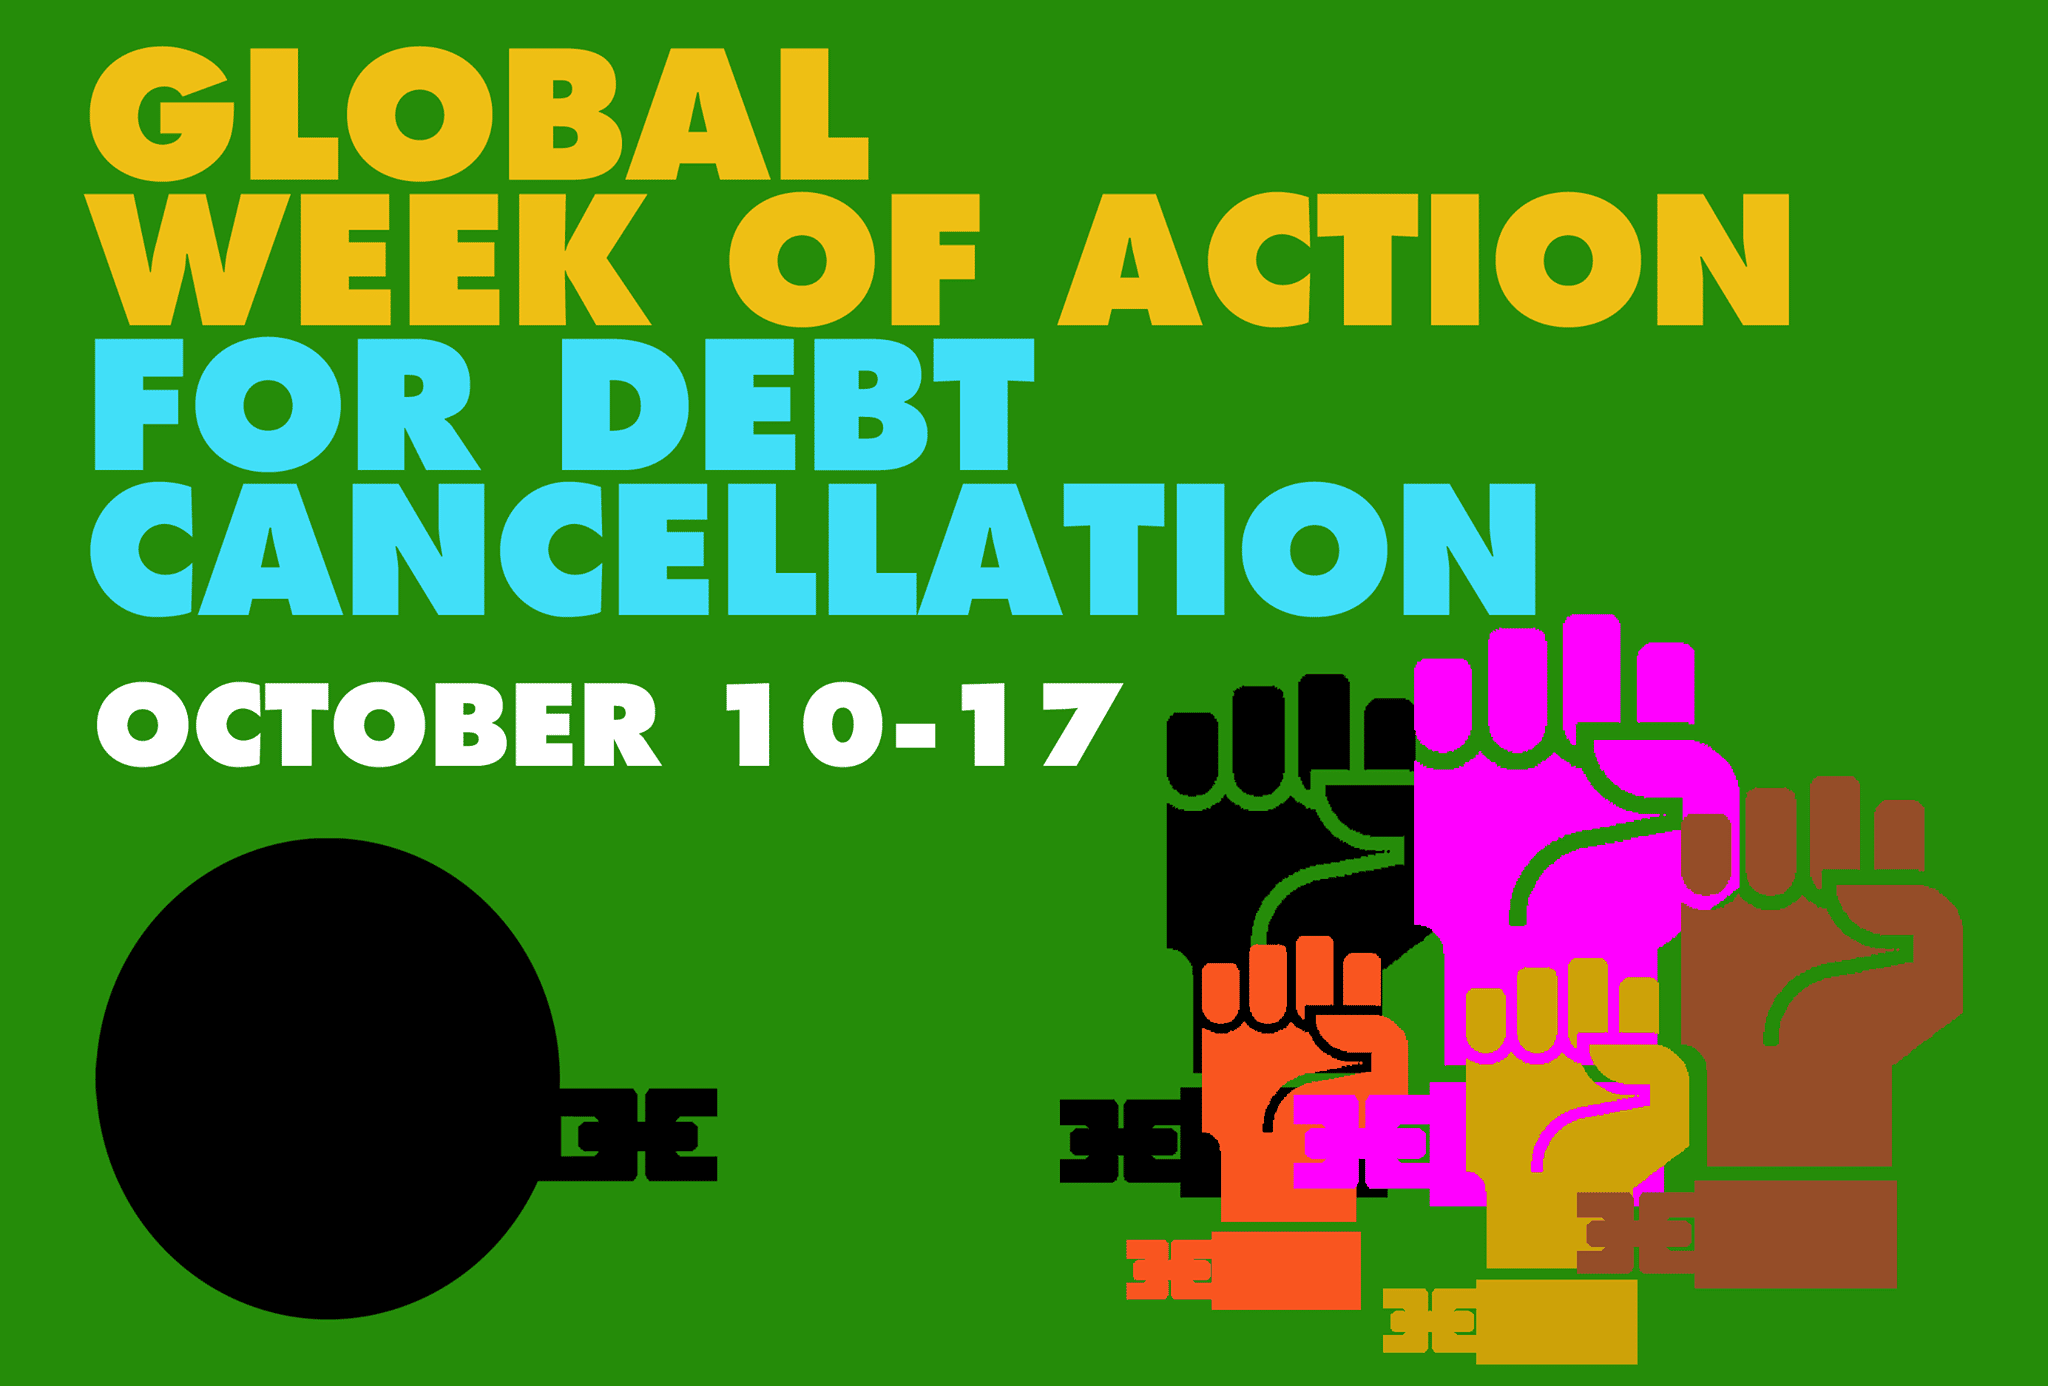 Global Week of Action for Debt Cancellation